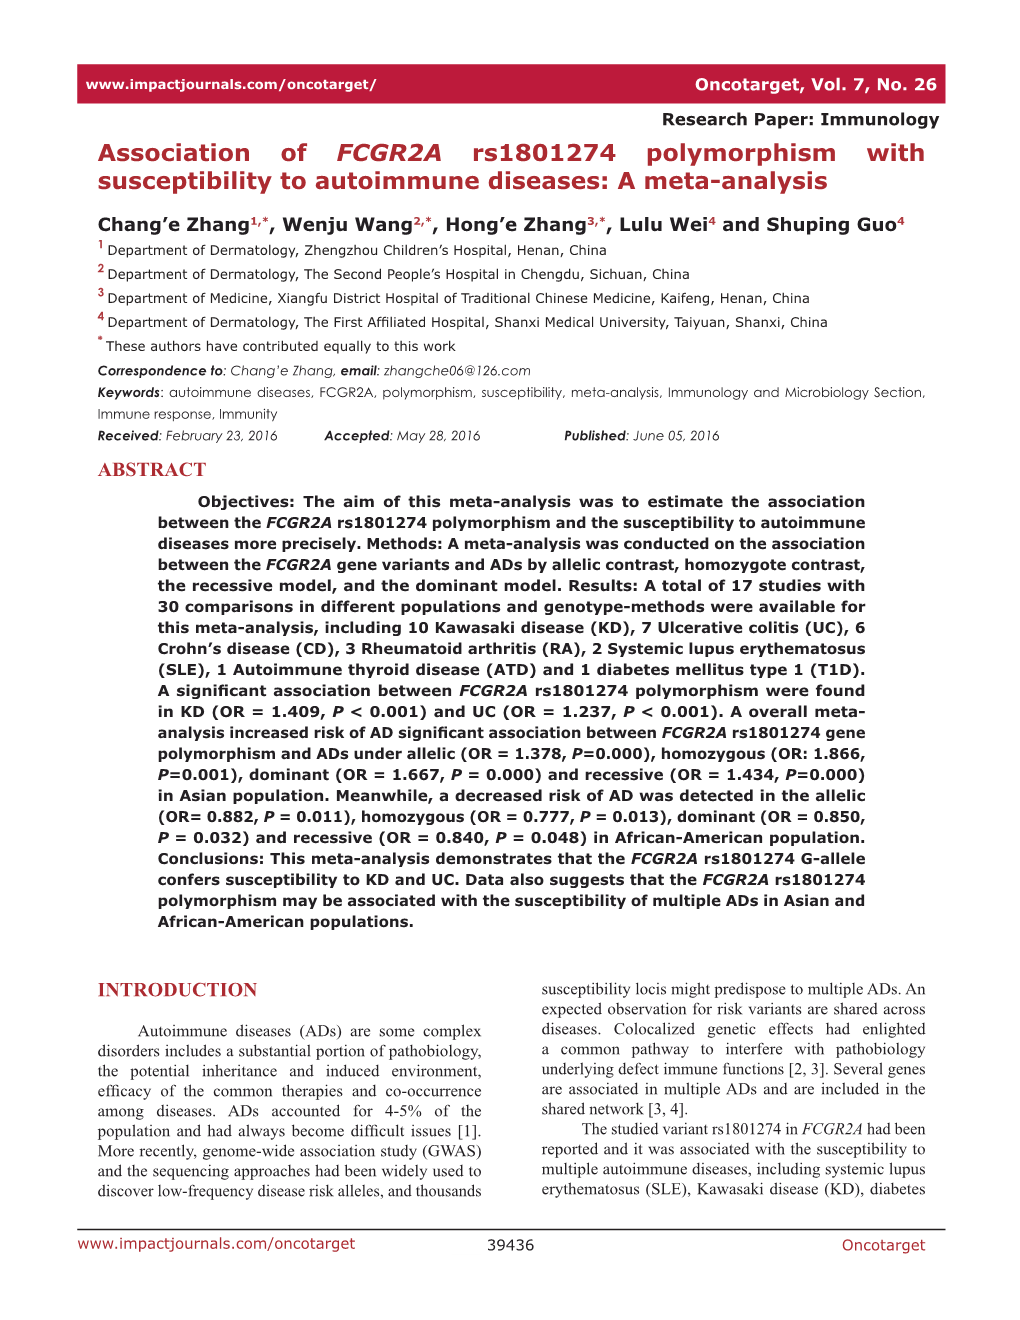 Association of FCGR2A Rs1801274 Polymorphism with Susceptibility to Autoimmune Diseases: a Meta-Analysis